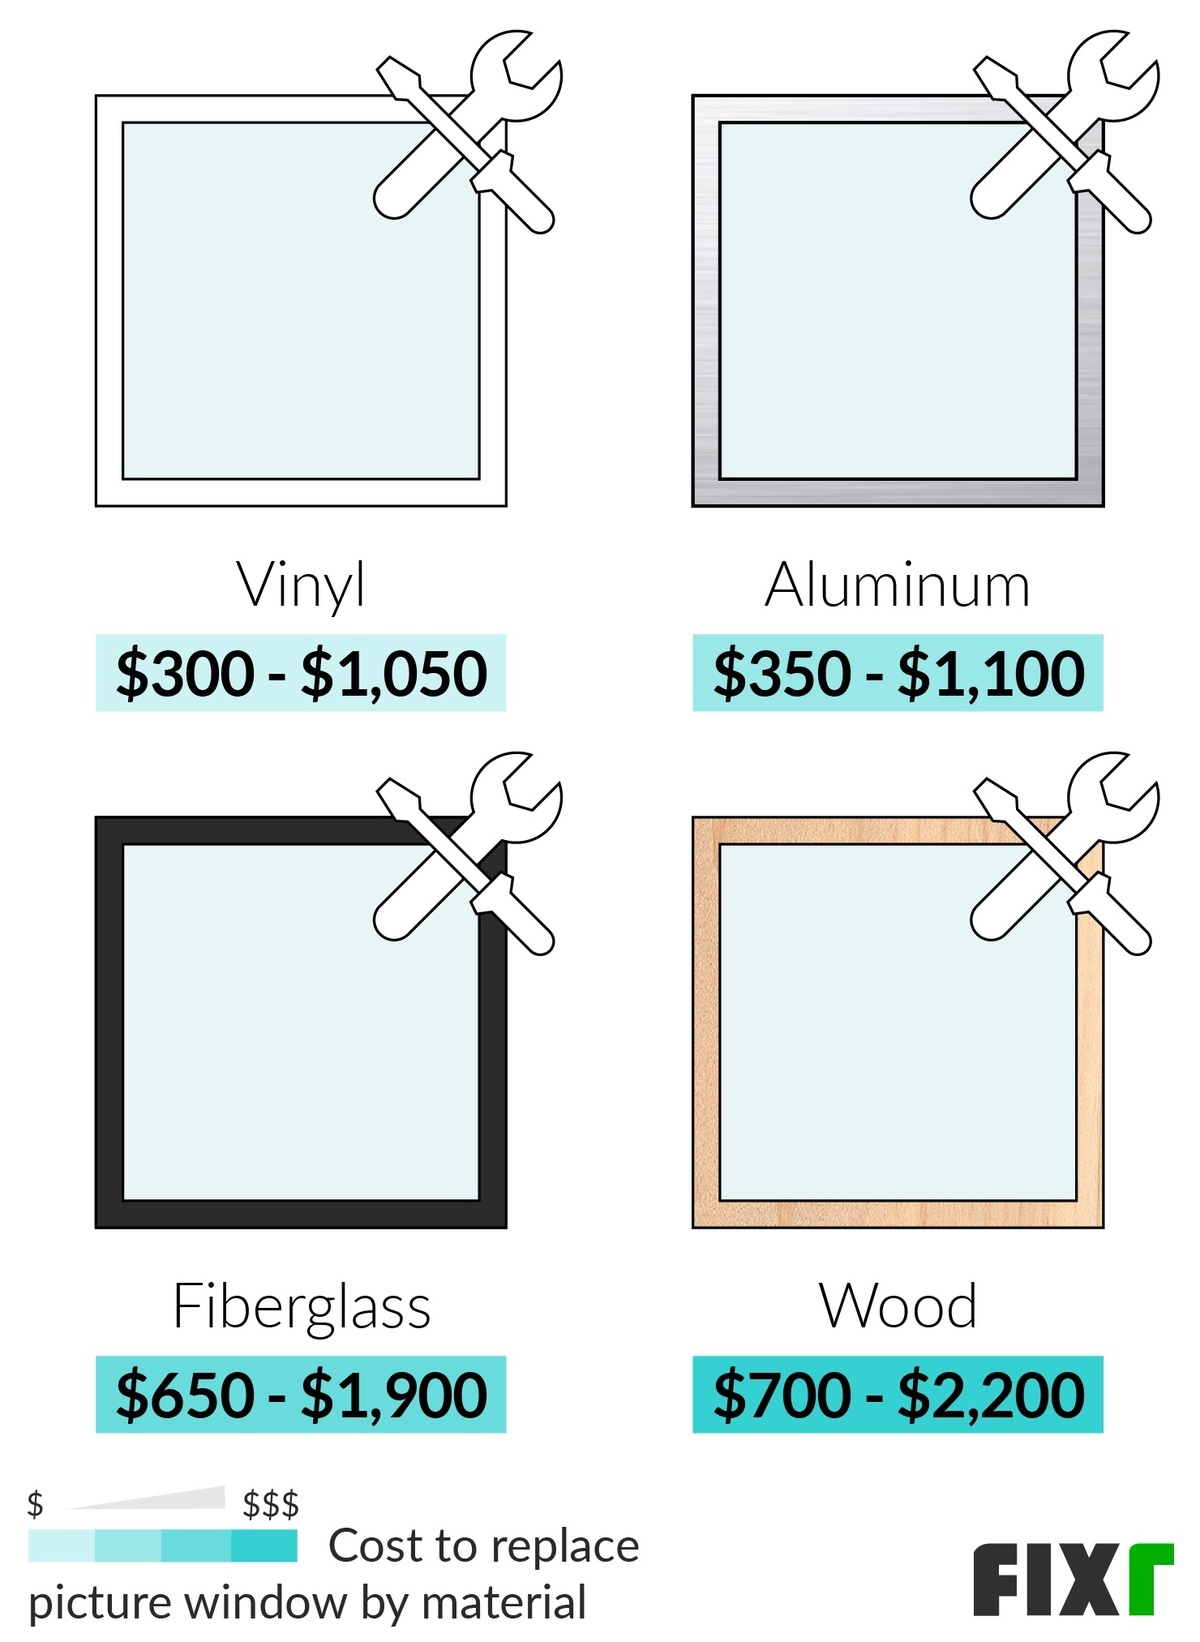 Cost to Replace a Vinyl, Aluminum, Fiberglass, and Wood Picture Window